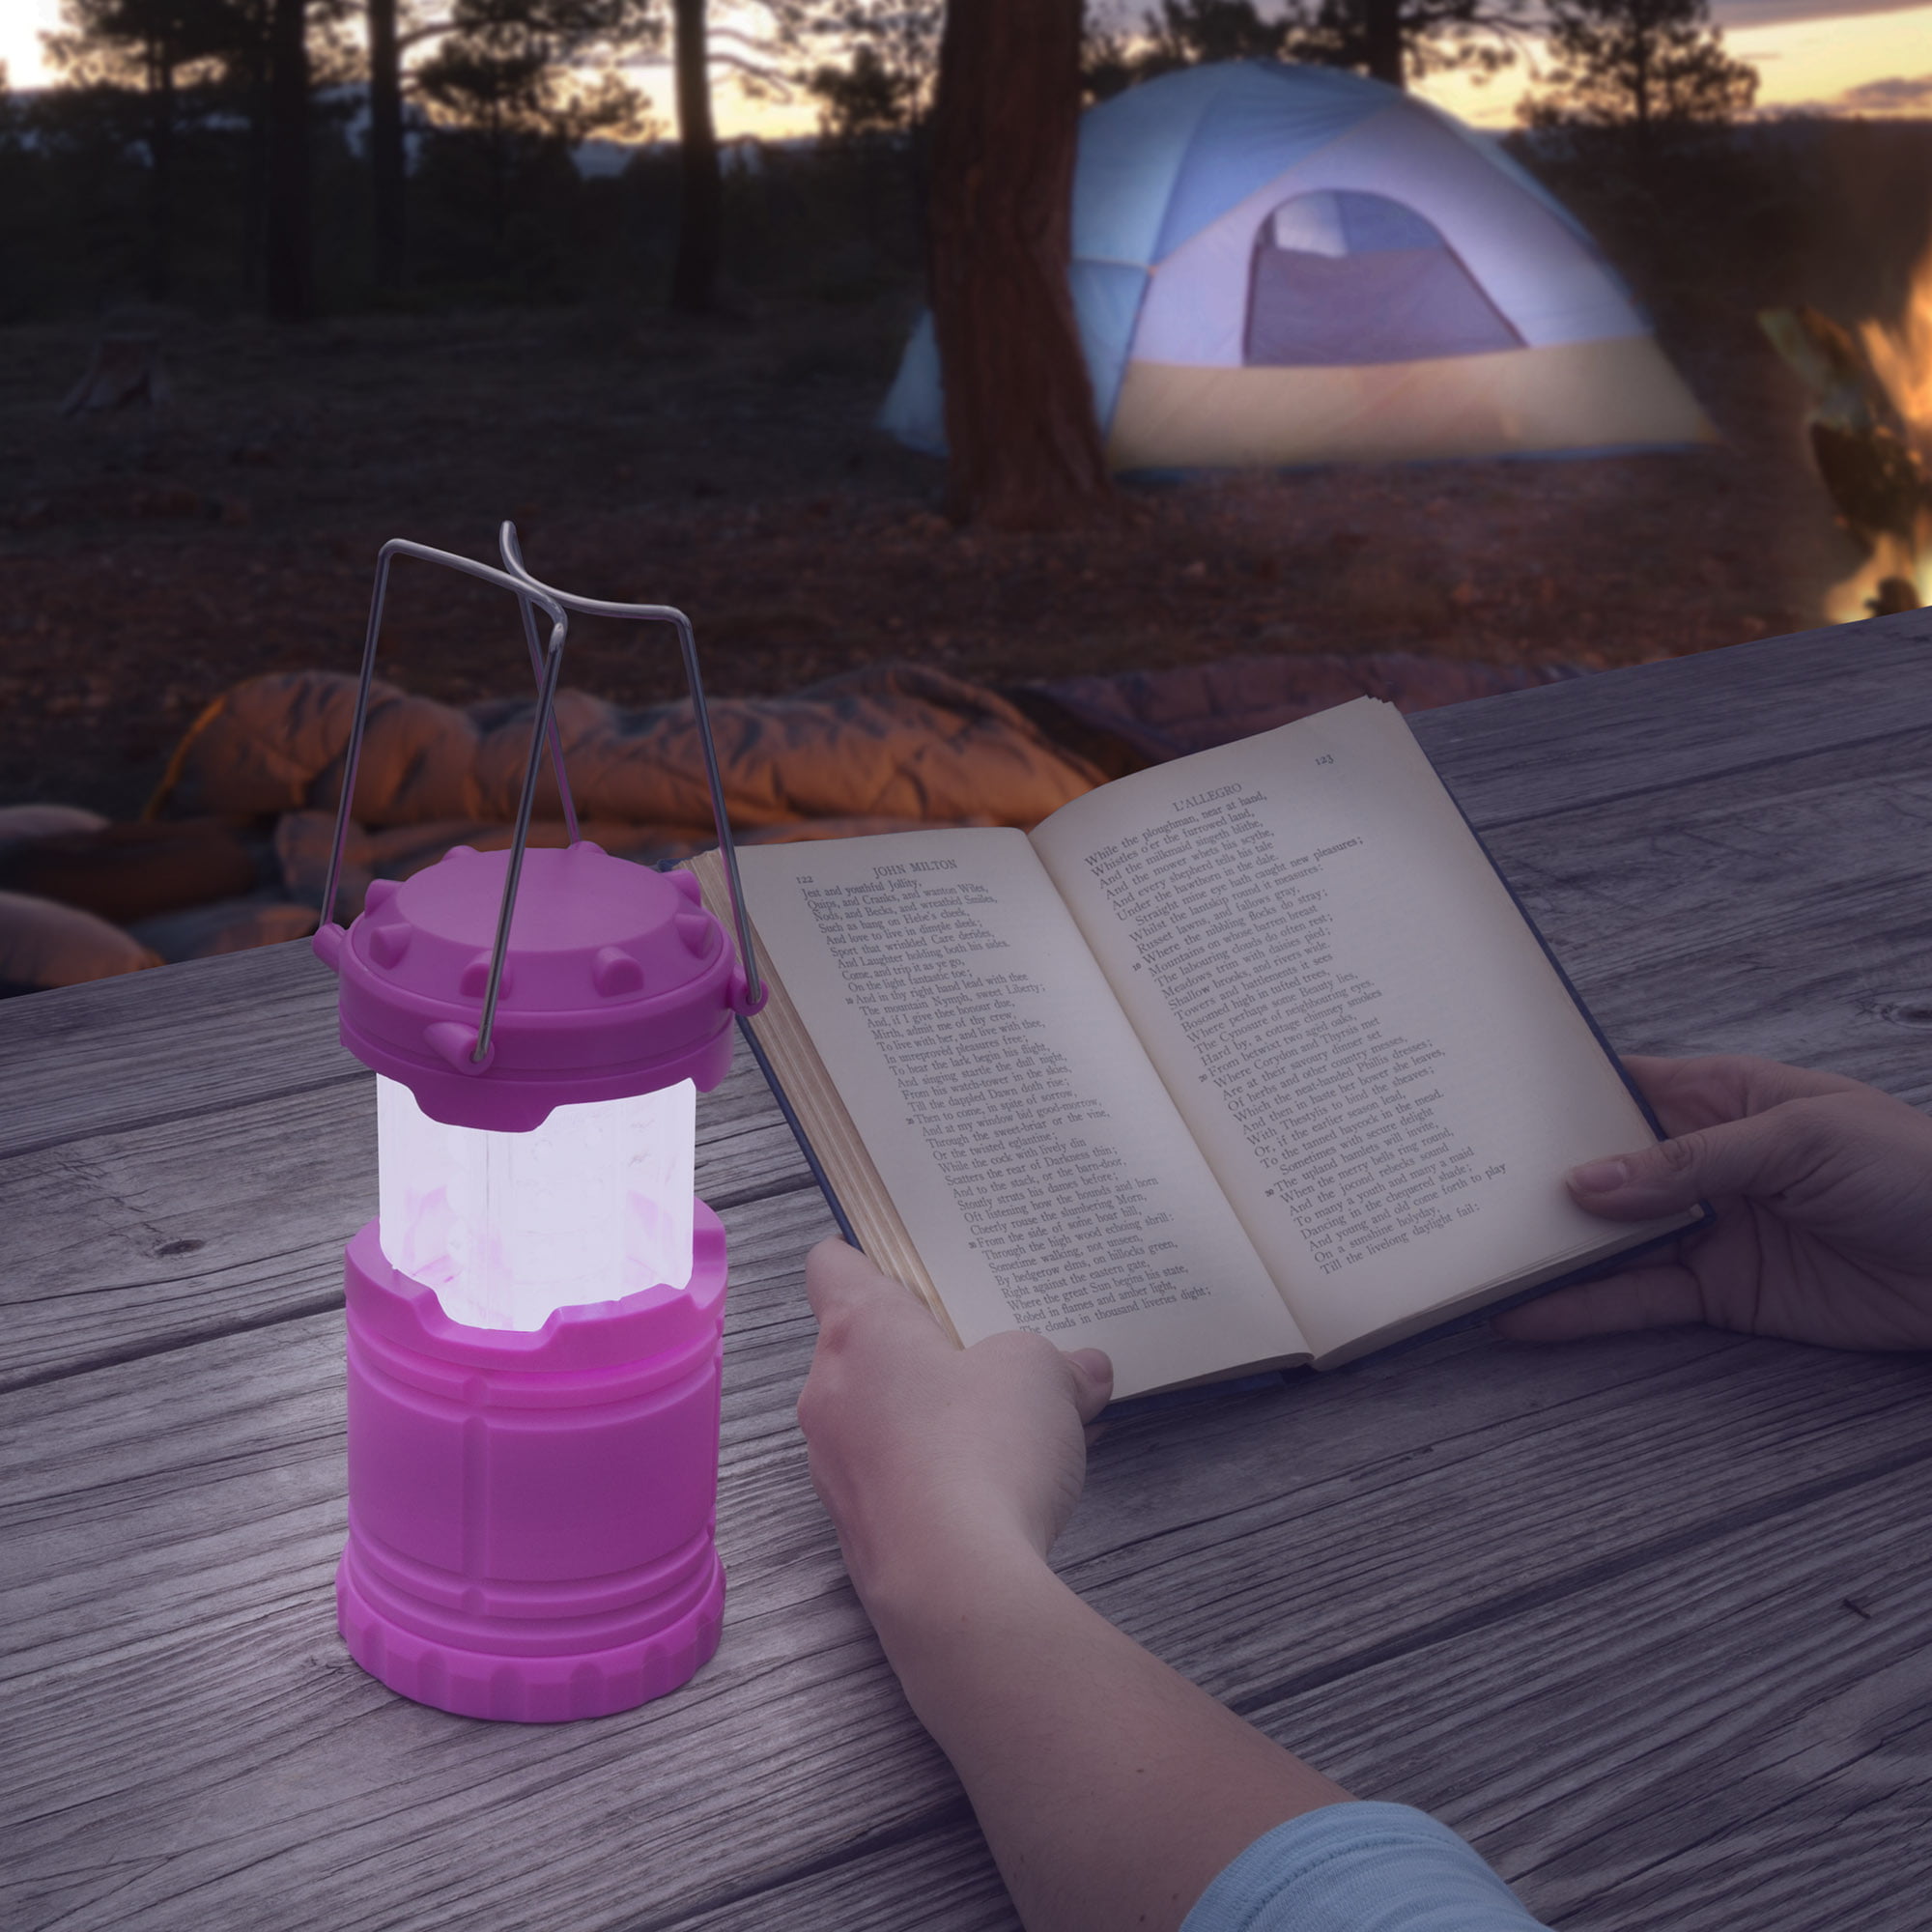 MalloMe Camping Lantern Pink Yellow 2 Pack Lanterns for Power Outages,  Camping Lights for Tent Hanging, Camp Light Tent Lamp Emergency Battery  Powered